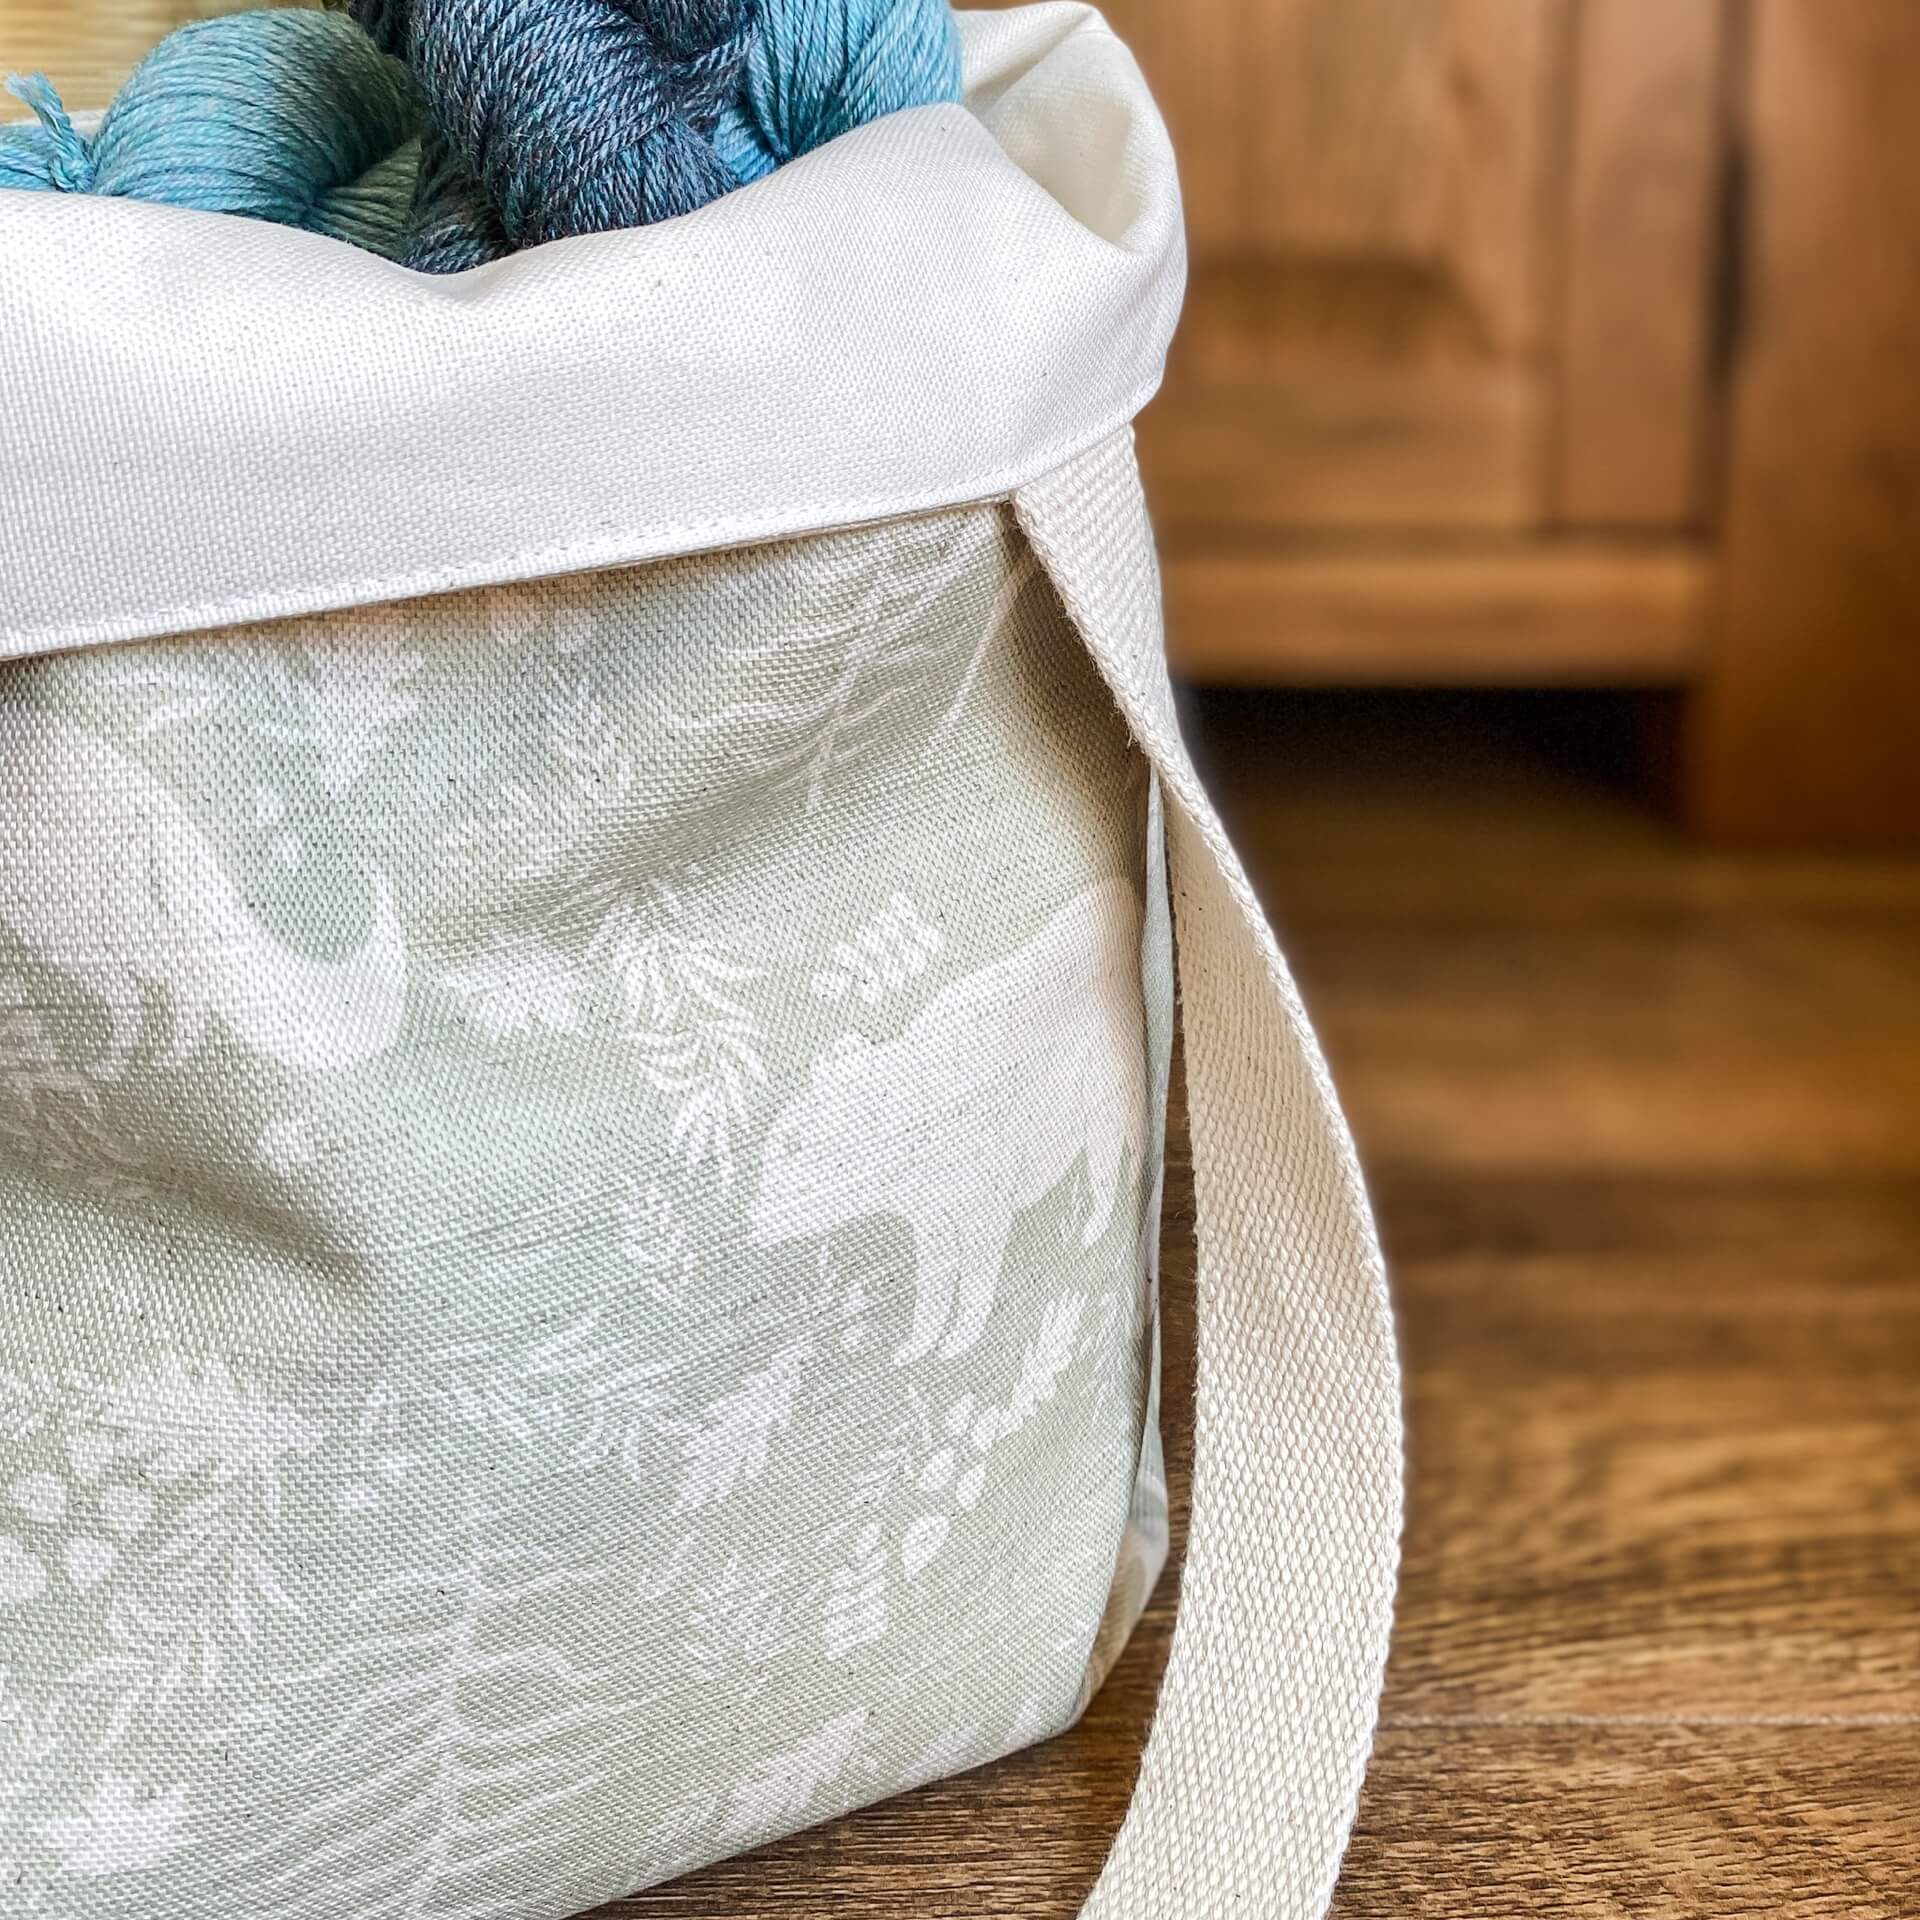 A close up image of a tote bag holding some blue yarn. The bag is made from a sage green fabric that is showing woodland animals and flora. The bag is sitting on a wooden floor.